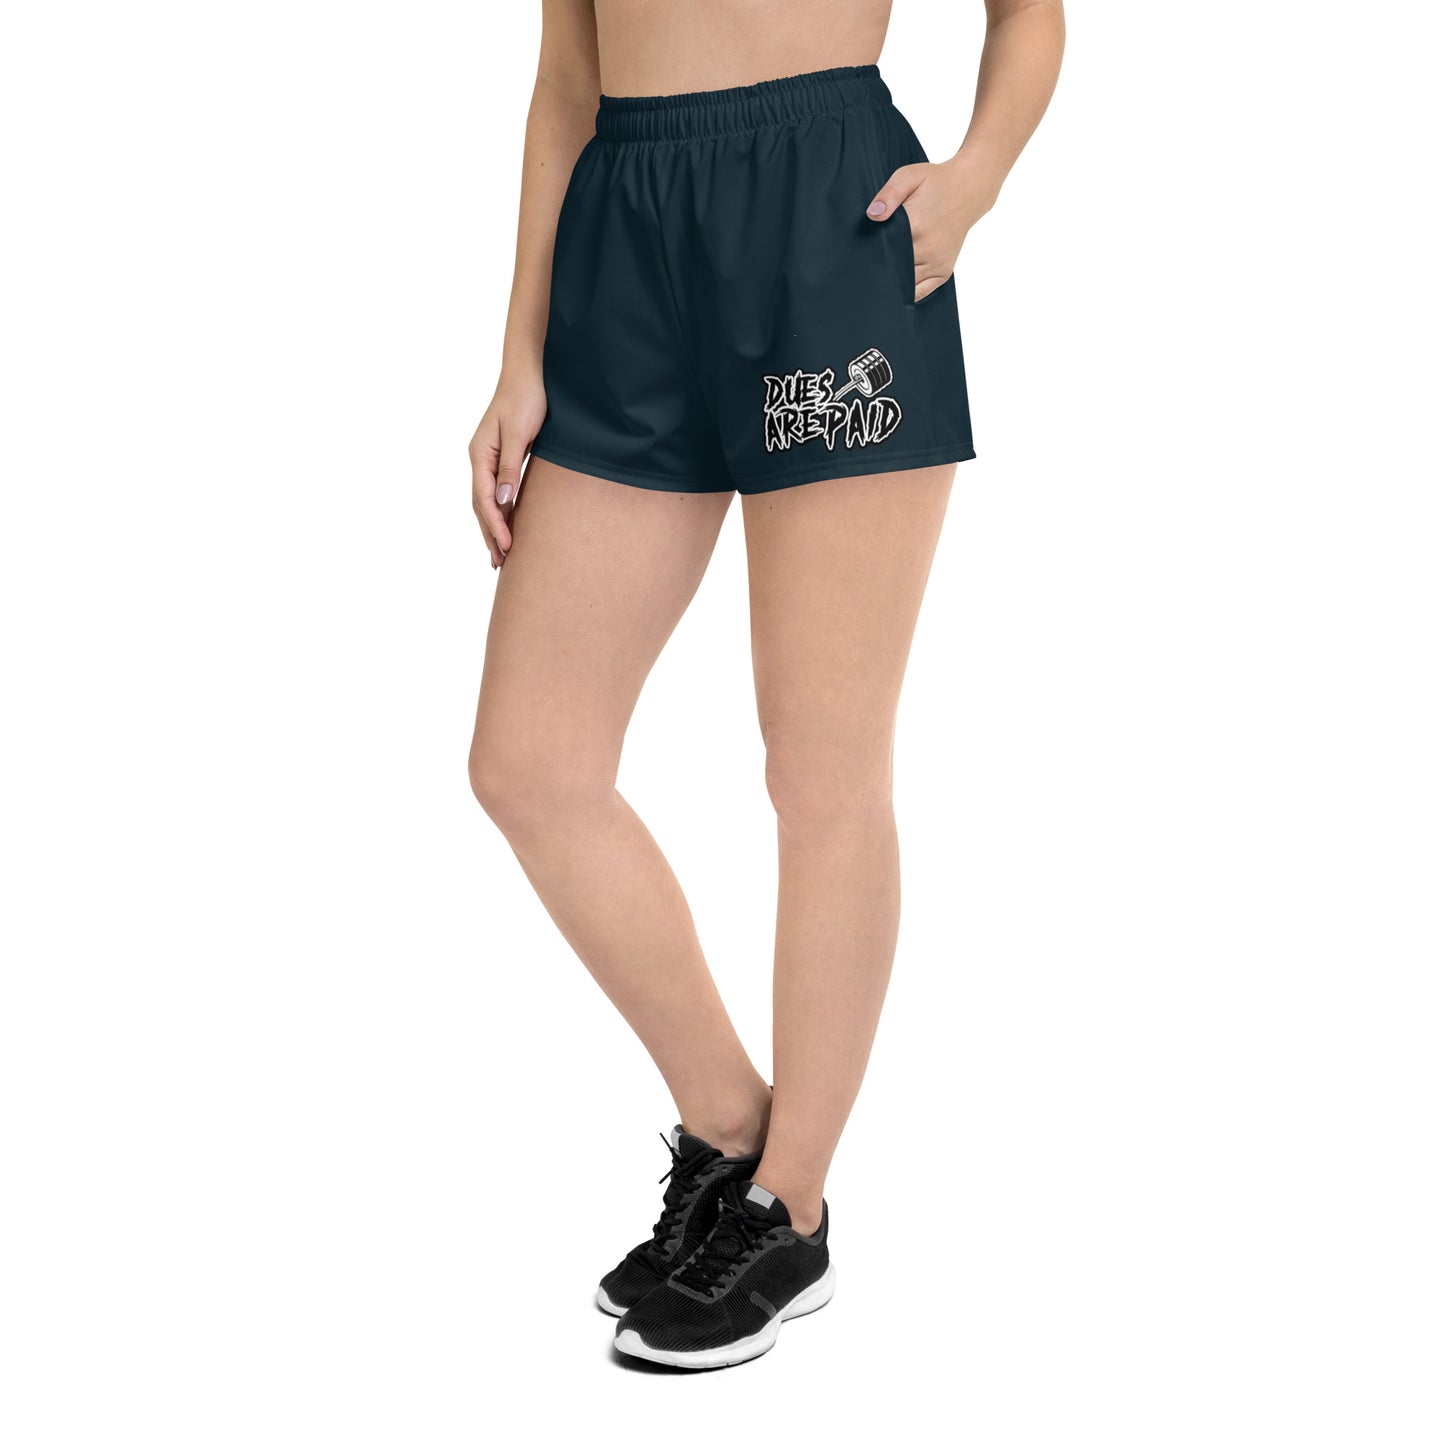 DUES ARE PAID Women’s Athletic Shorts (dark blue)